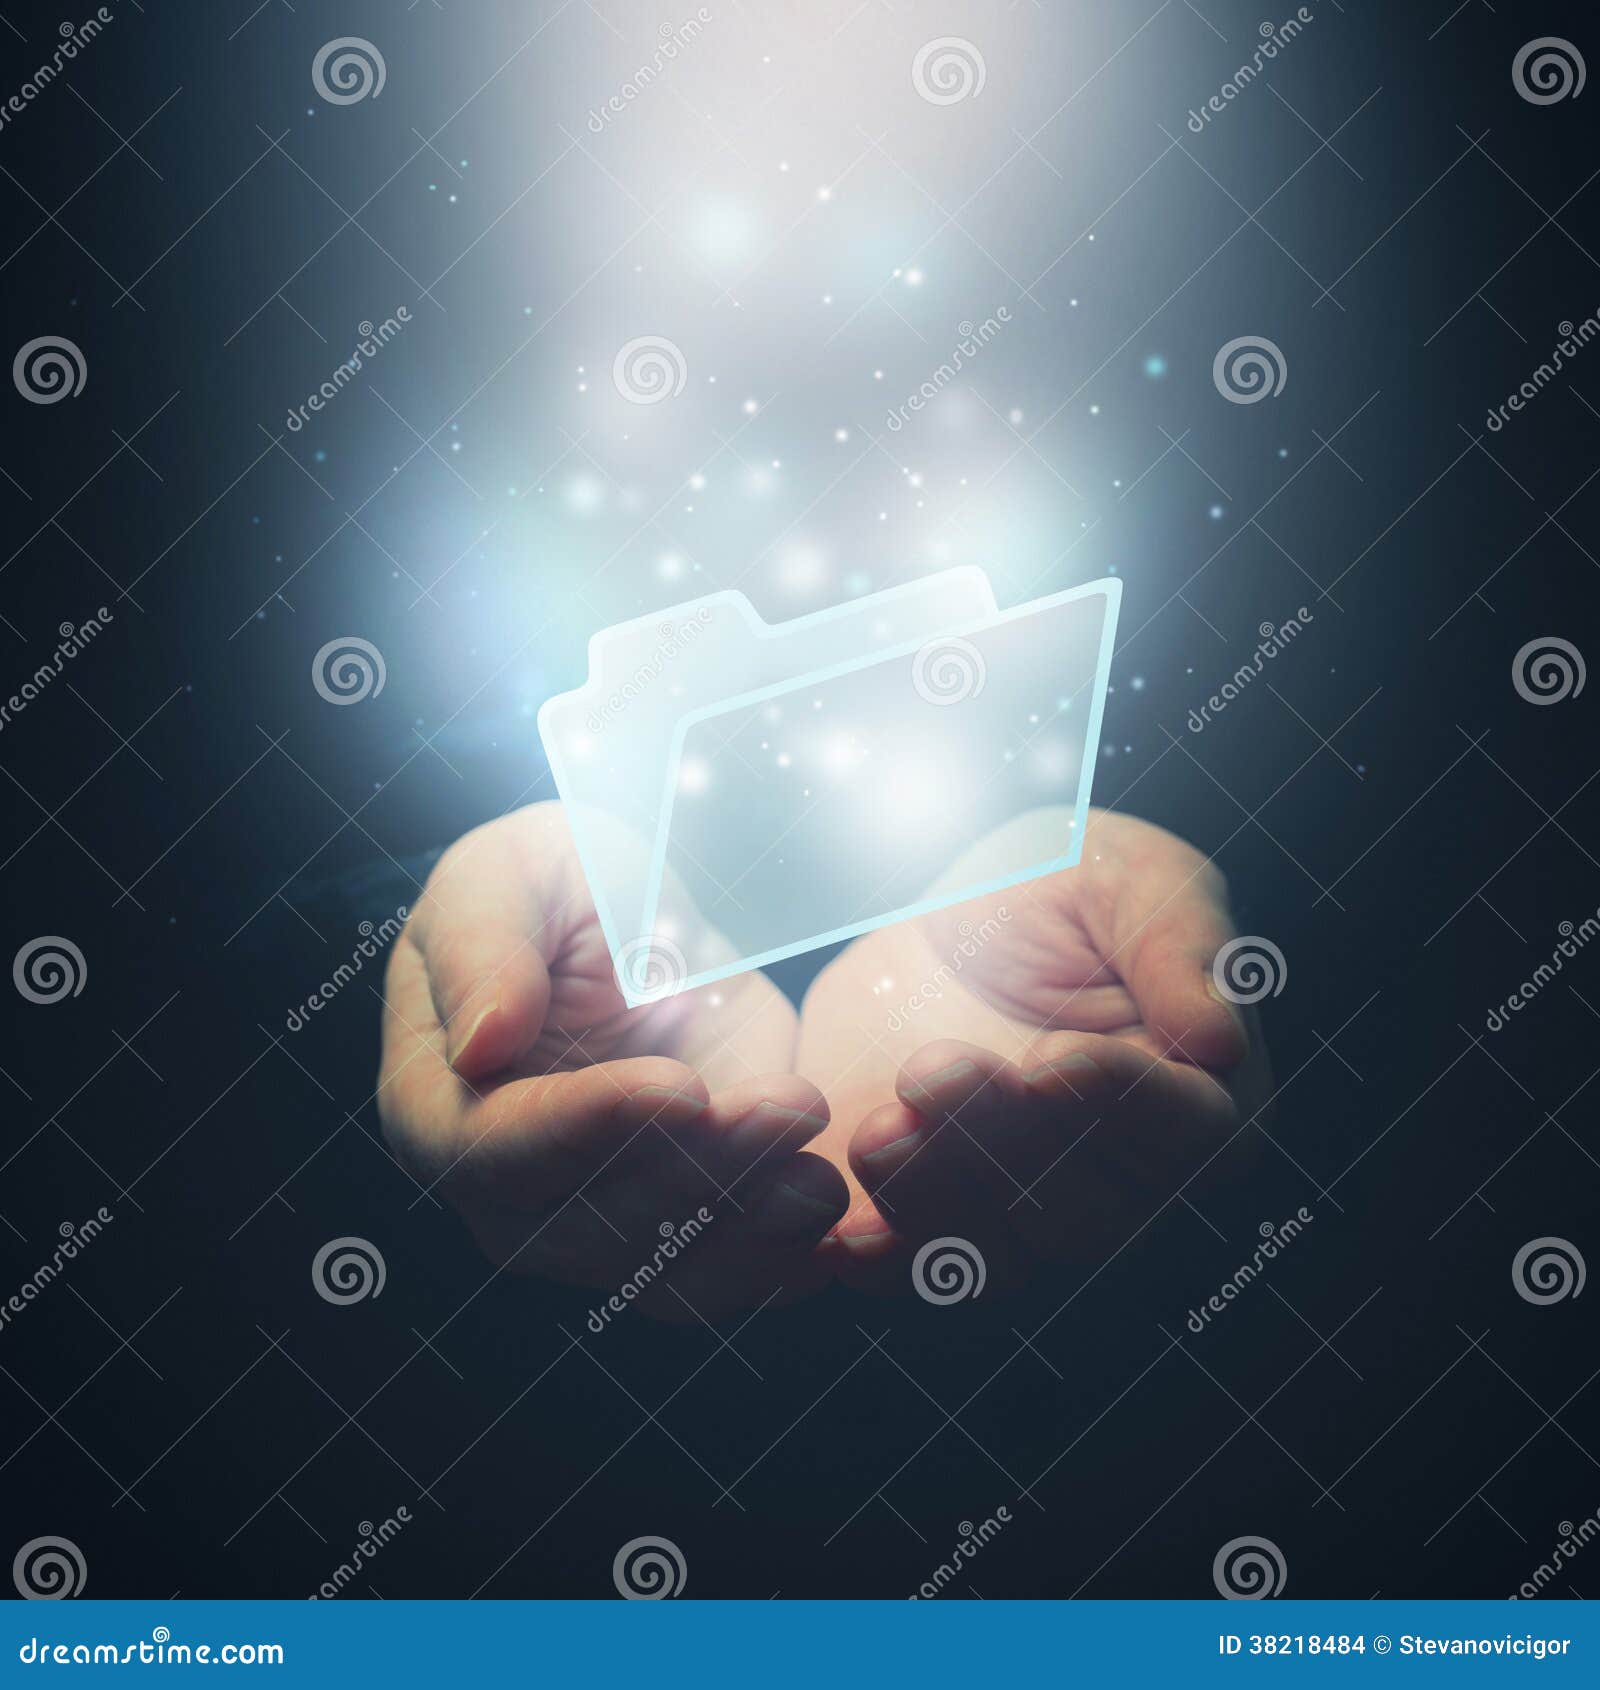 open hands with file document file folder. file download concept